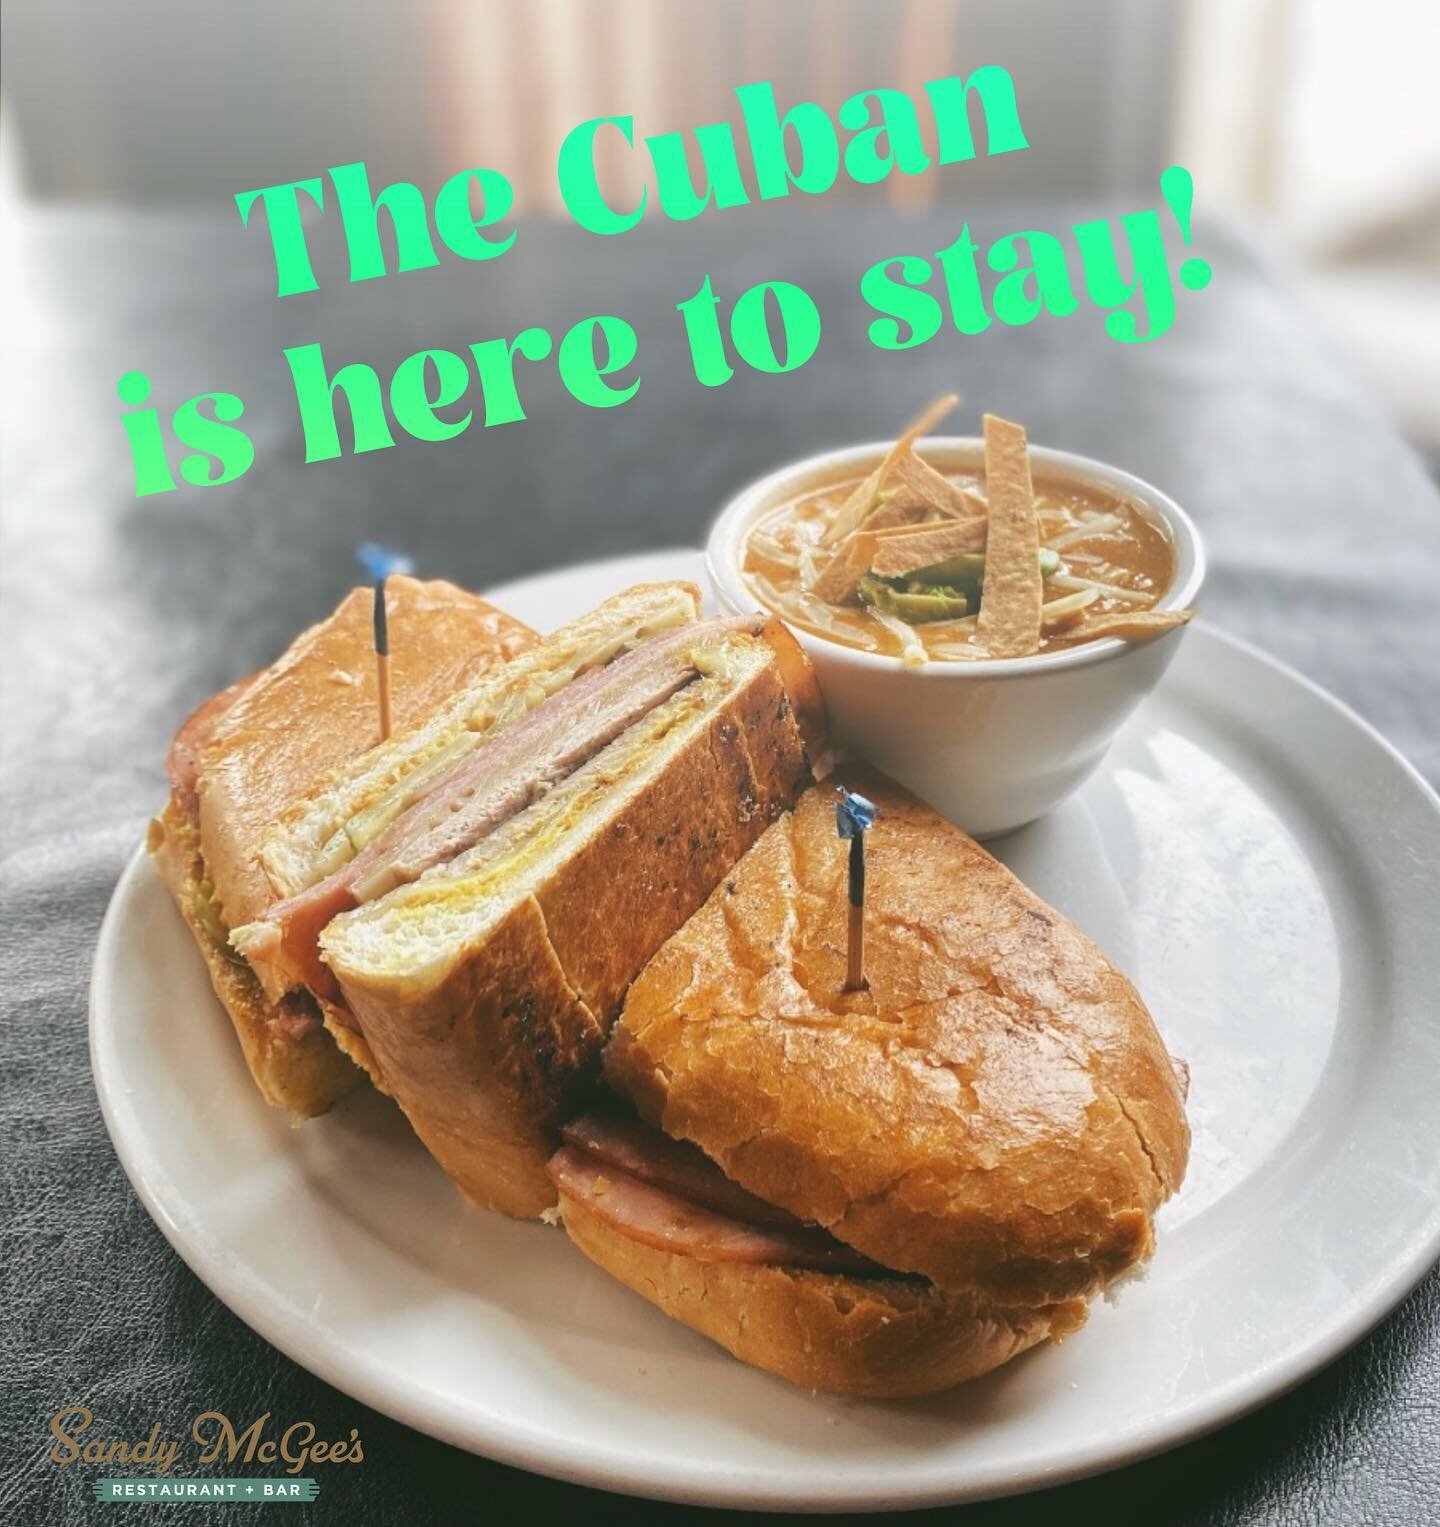 Our latest Burger of the Month has been so popular, we&rsquo;re adding it to the menu permanently! 🇨🇺 🥪🇨🇺🥪🇨🇺🥪🇨🇺🥪
We will have another Burger of the Month in April, but for now you can rest assured The Cuban will be here when you crave it.